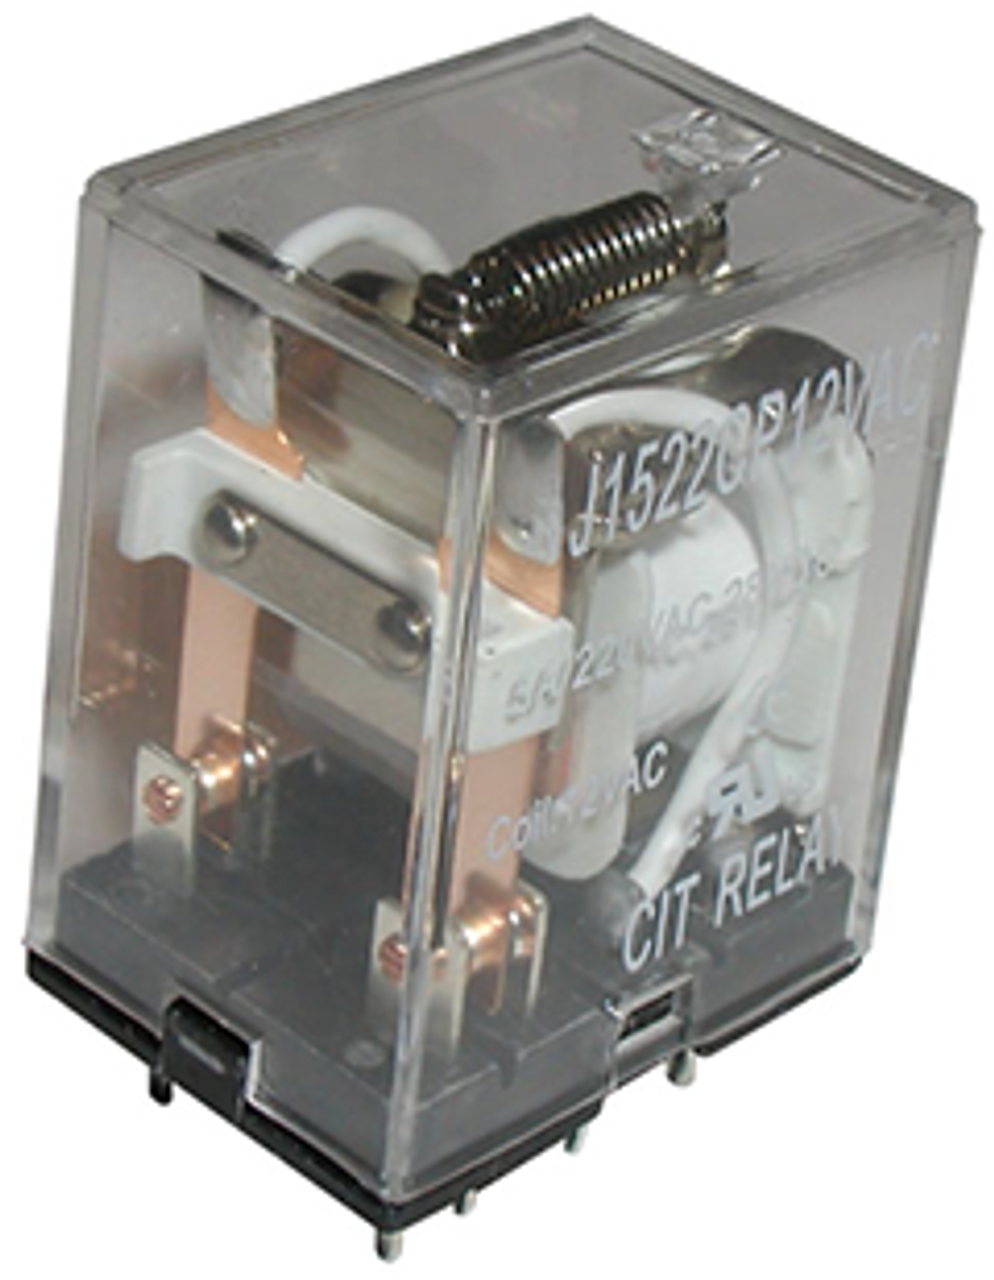 CIT Relay and Switch J1522CF12VDC Industrial Relays